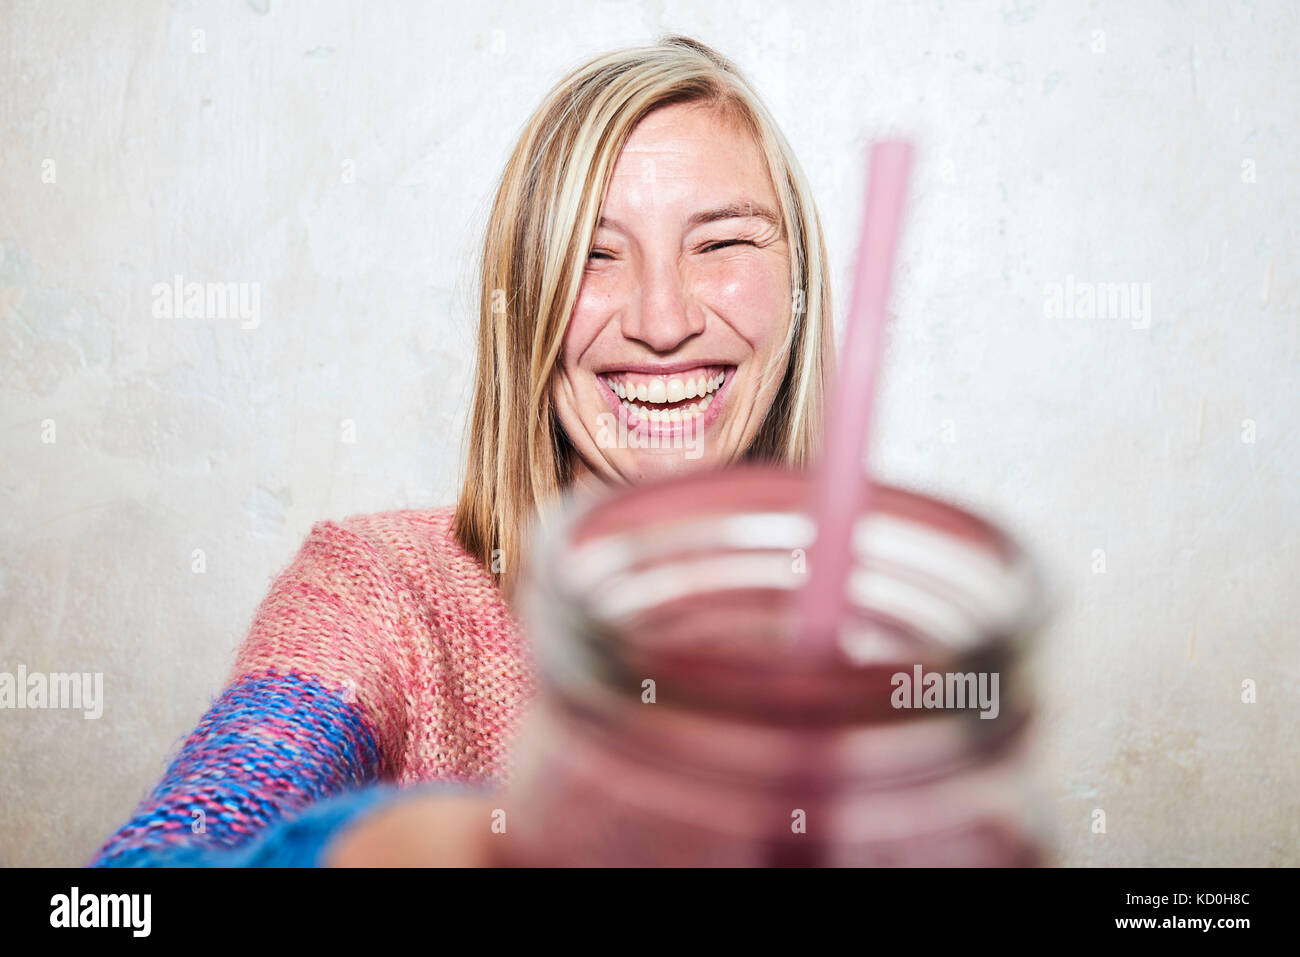 Portrait of woman holding drink towards camera, laughing Stock Photo